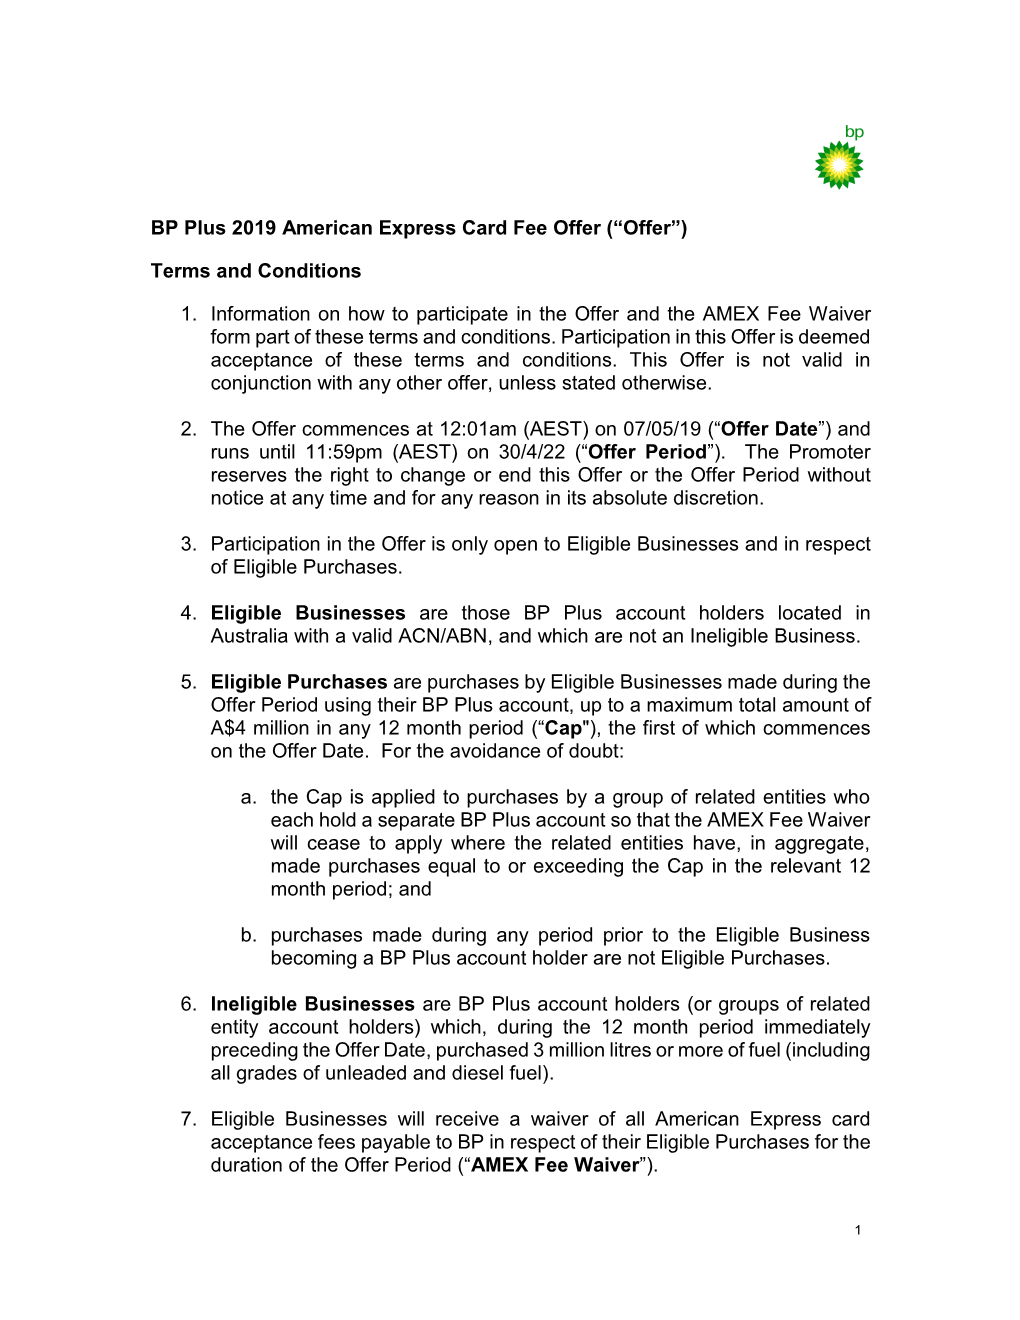 BP Plus Amex Offer Terms and Conditions Pdf / 156.5 KB